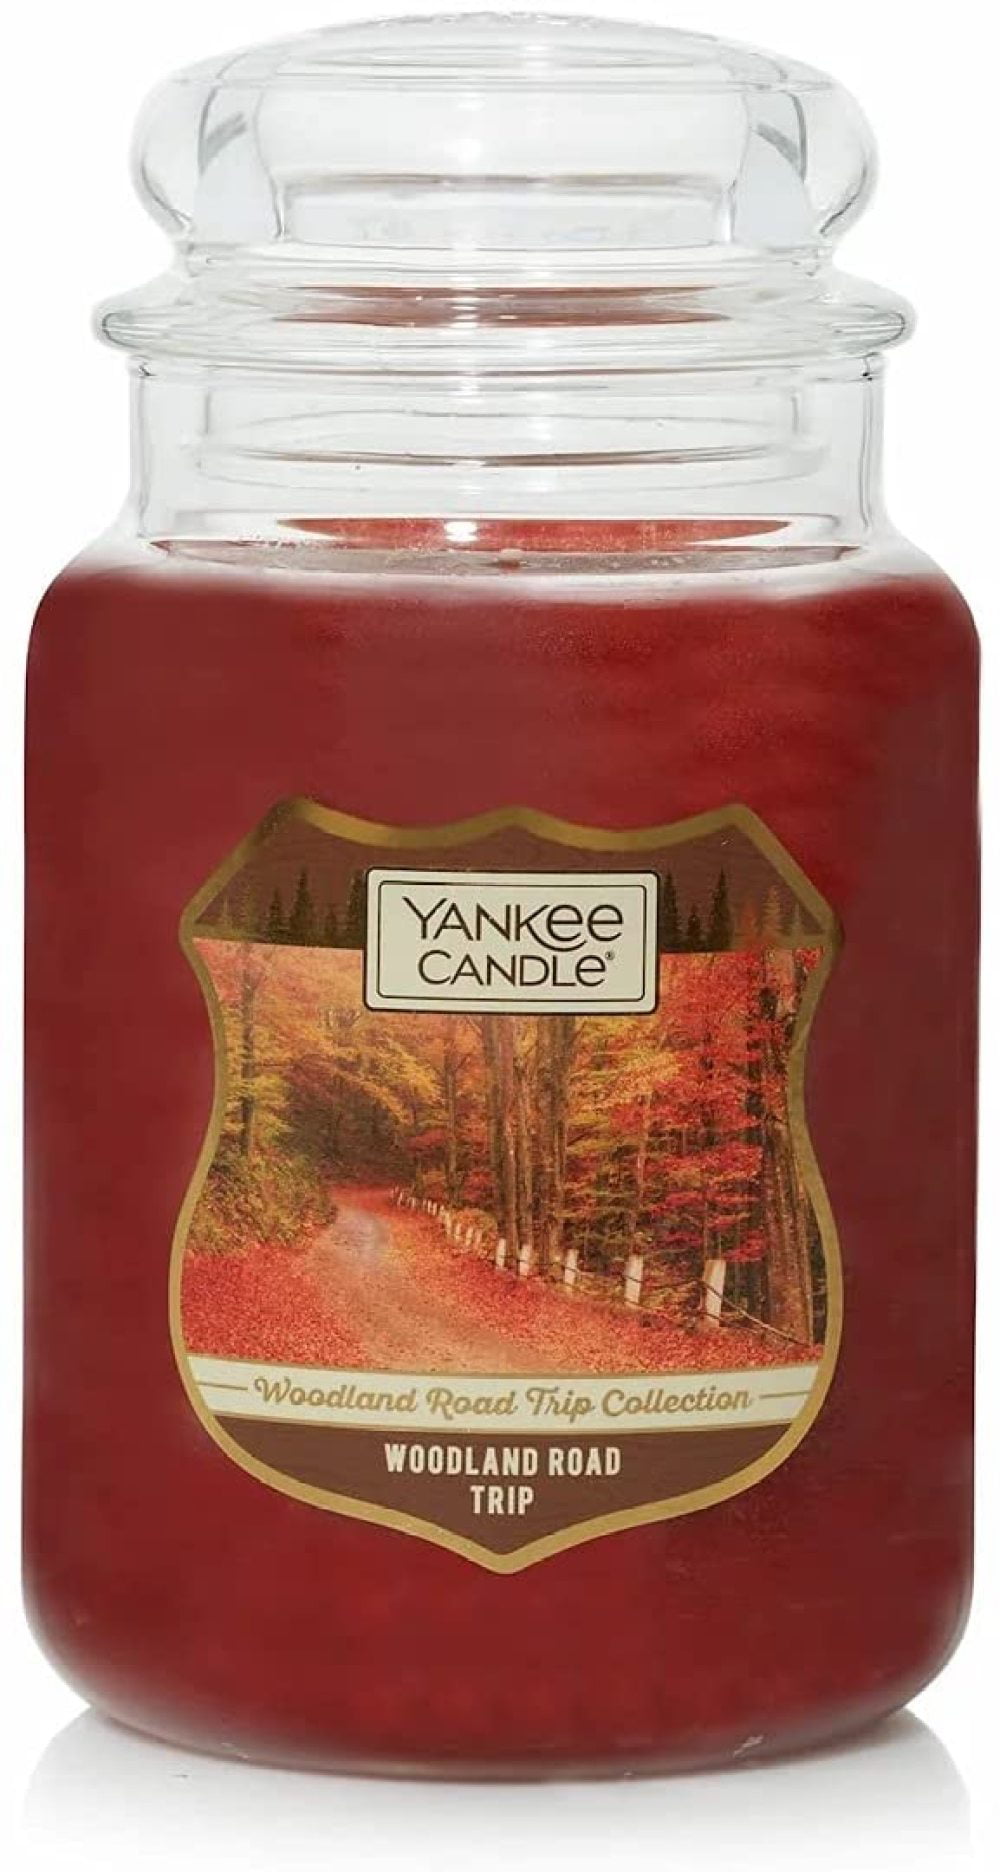 ☆☆SWEET STRAWBERRY☆☆ LARGE YANKEE CANDLE JAR☆☆ FREE SHIPPING☆☆GREAT SCENT 